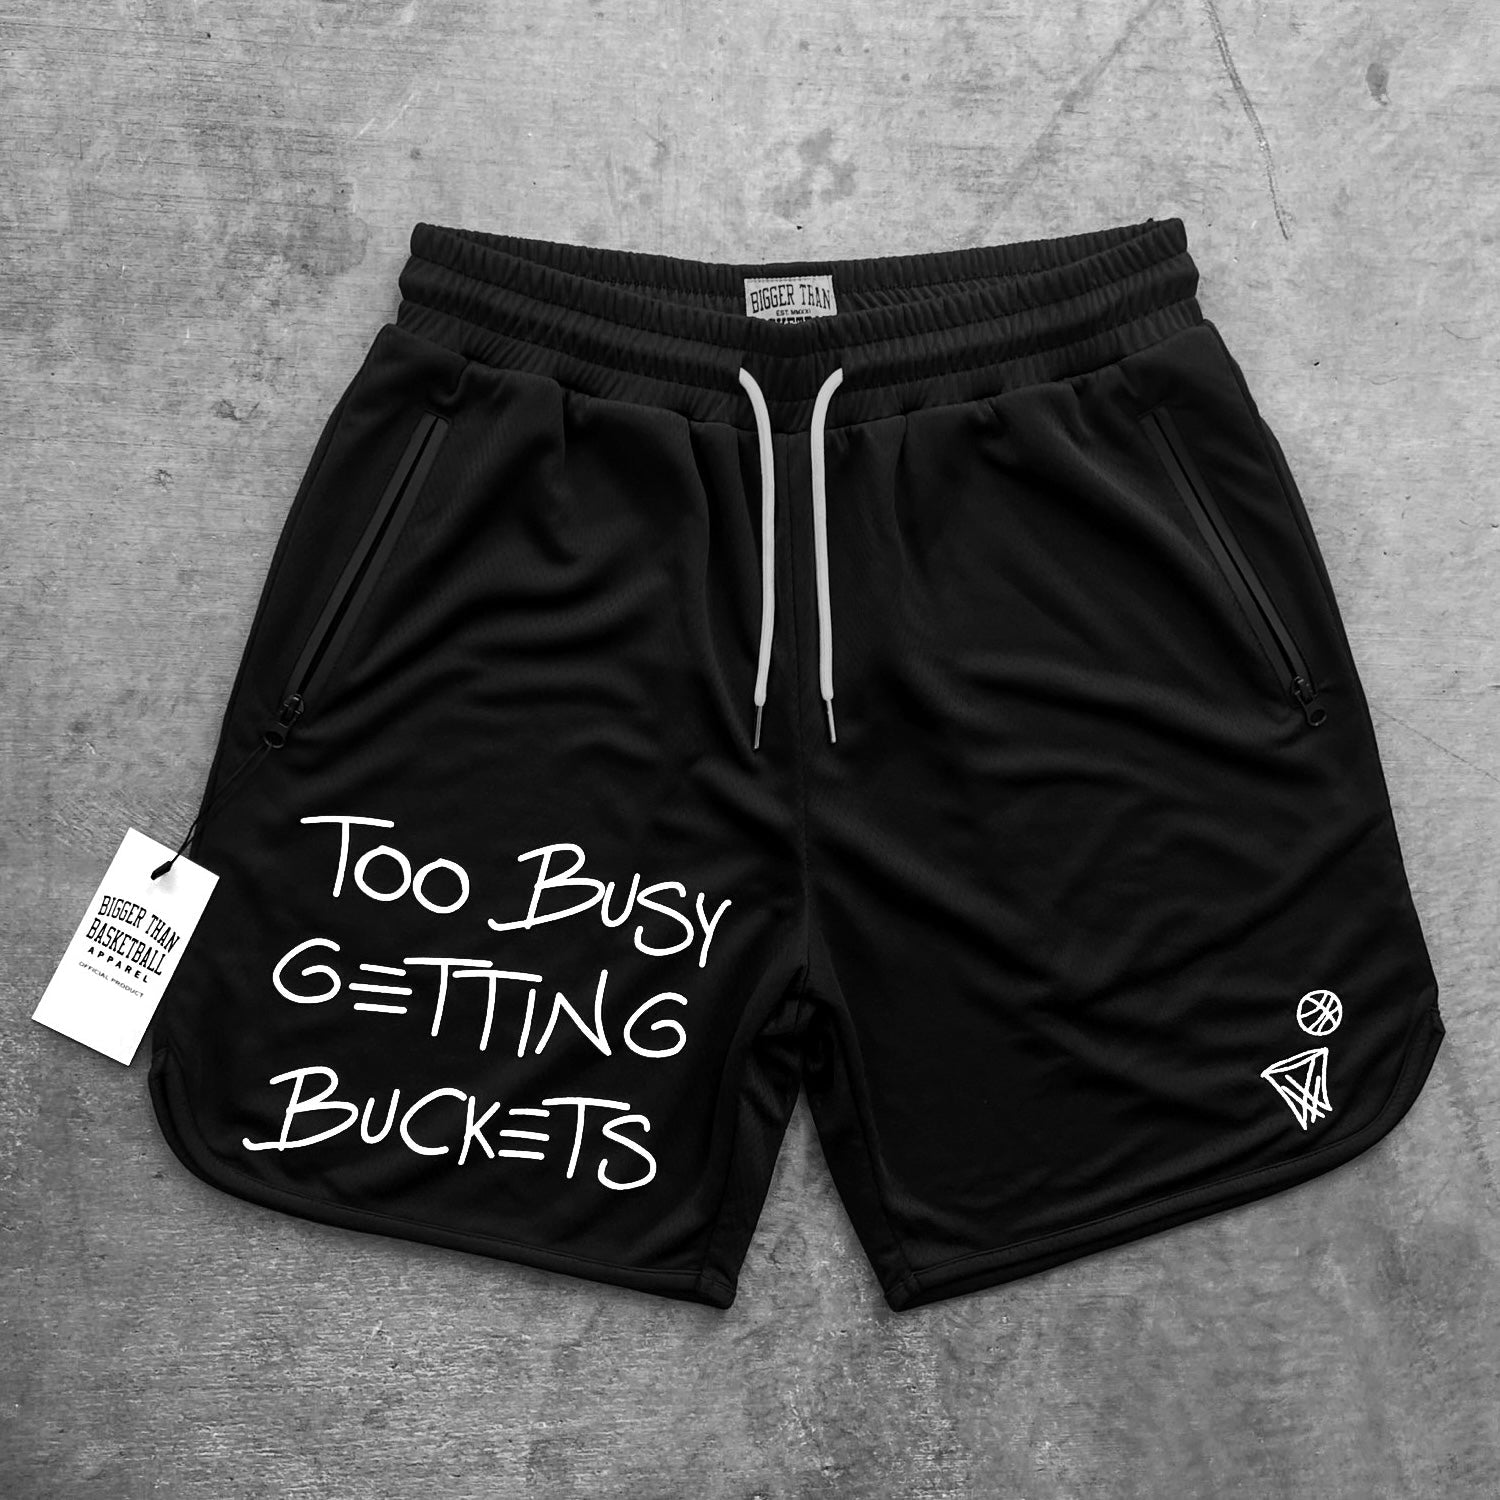 Too Busy Getting Buckets - Shorts - Black - Youth